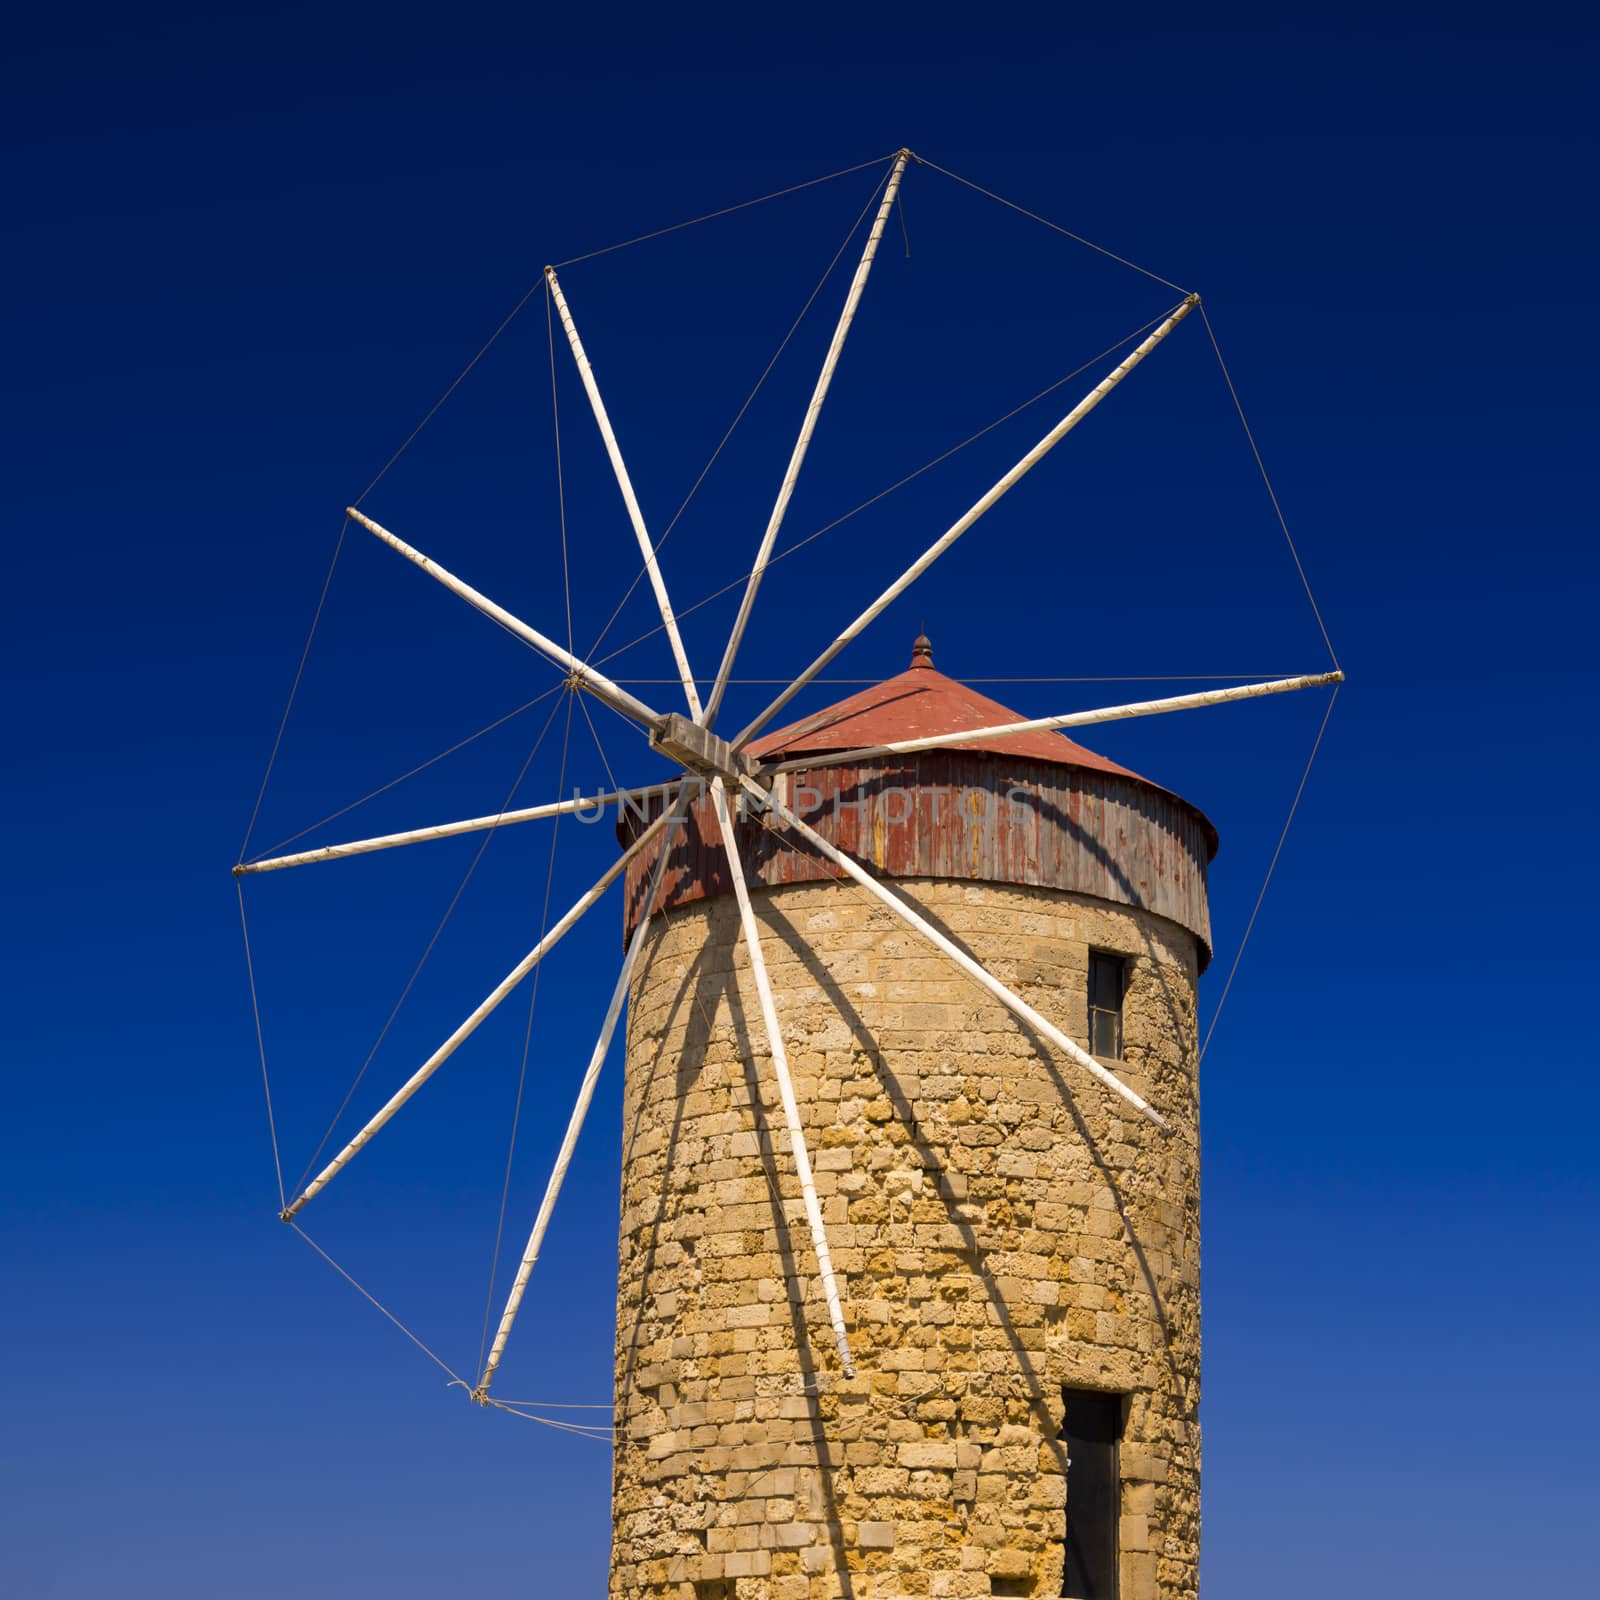 Stone Windmill stand against the blue sky at Mandraki Harbour, Rhodes